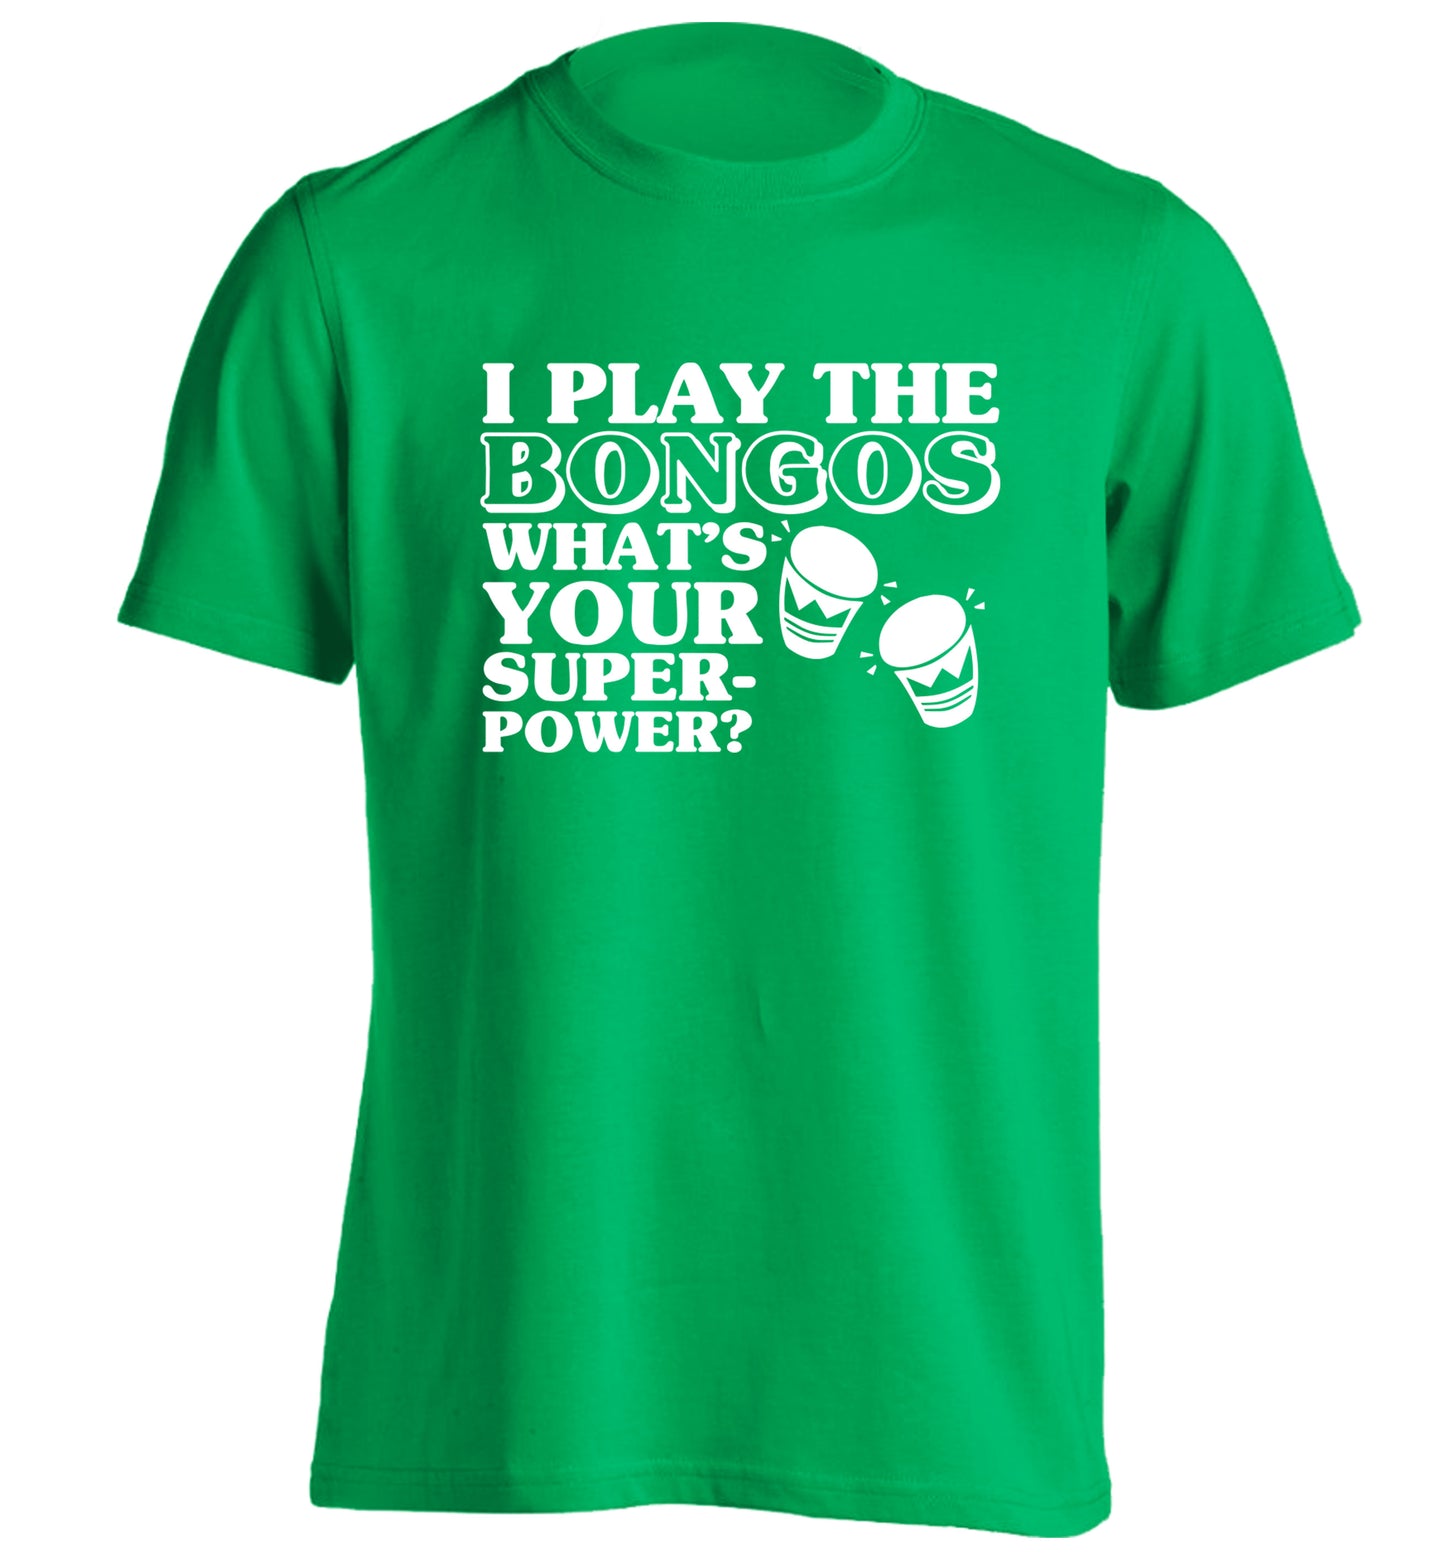 I play the bongos what's your superpower? adults unisexgreen Tshirt 2XL